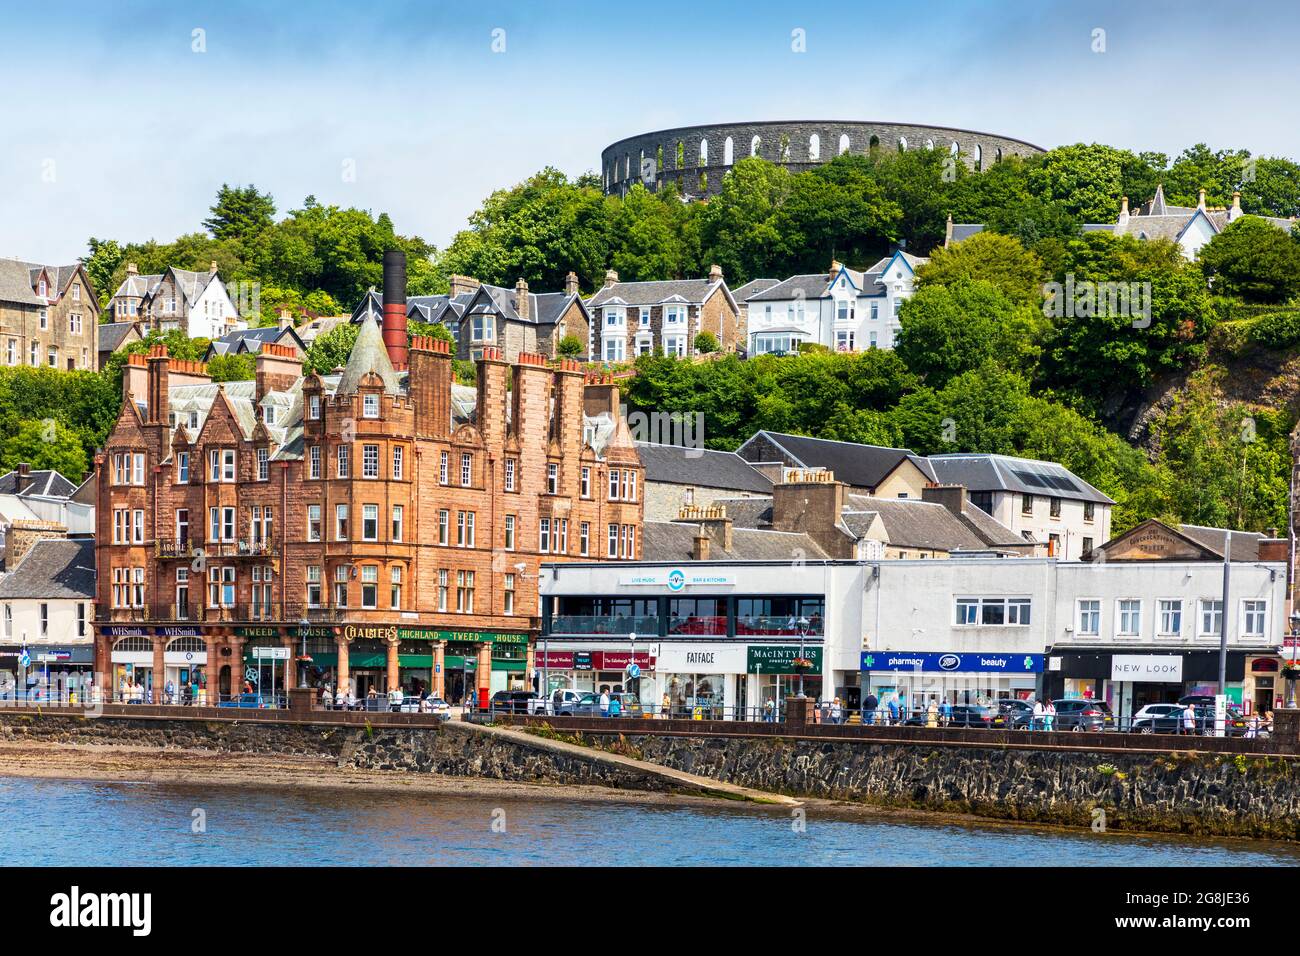 Oban promenade and esplanade with a view of Argyll Mansions and McCaigs Folly on Battery Hill overlooking the town, Oban, Argyll, Scotland, UK Stock Photo